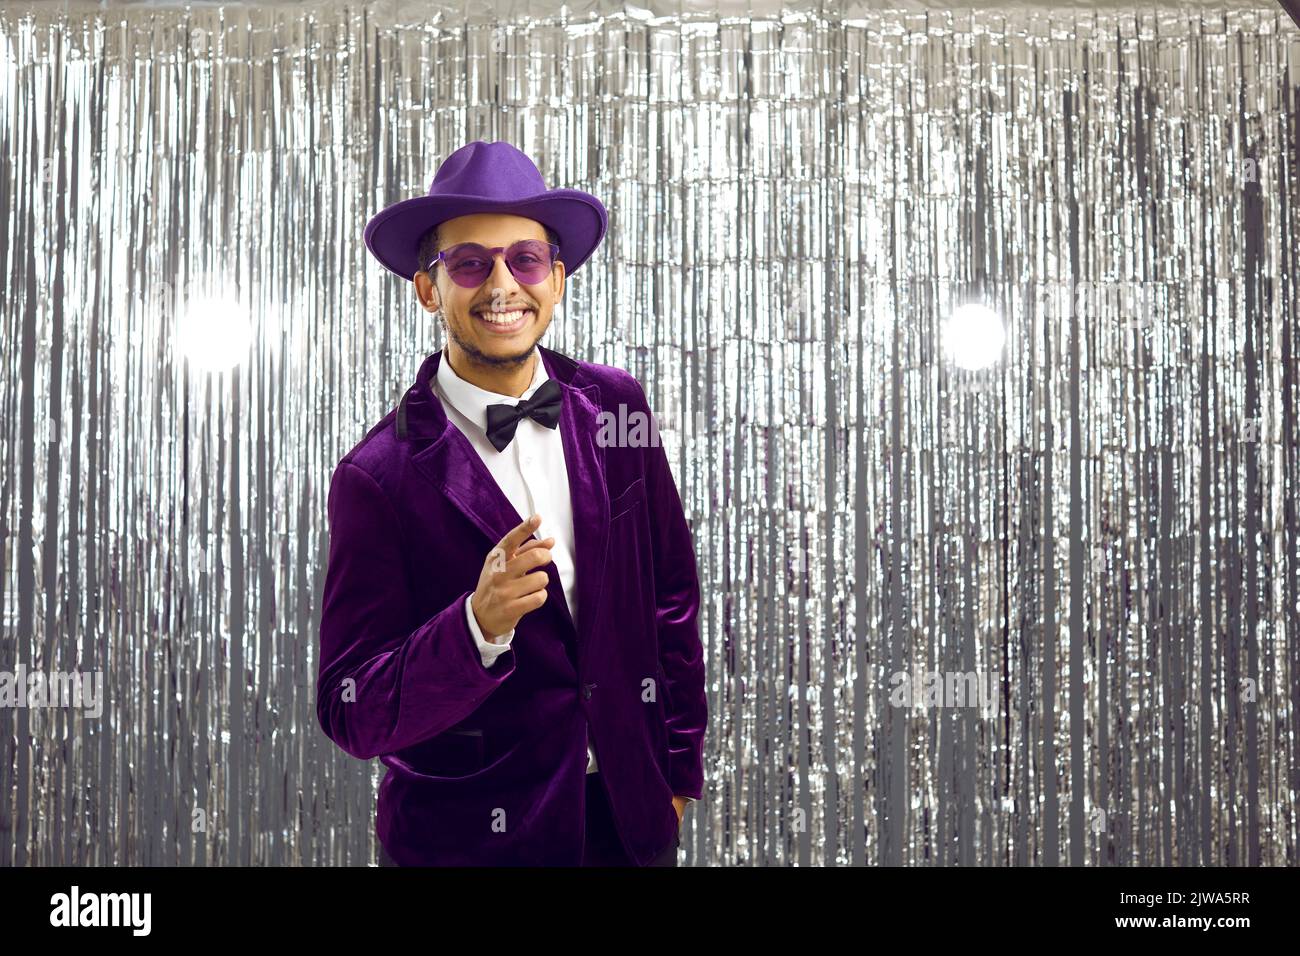 Happy man in purple suit, hat and glasses presents something on blank background Stock Photo